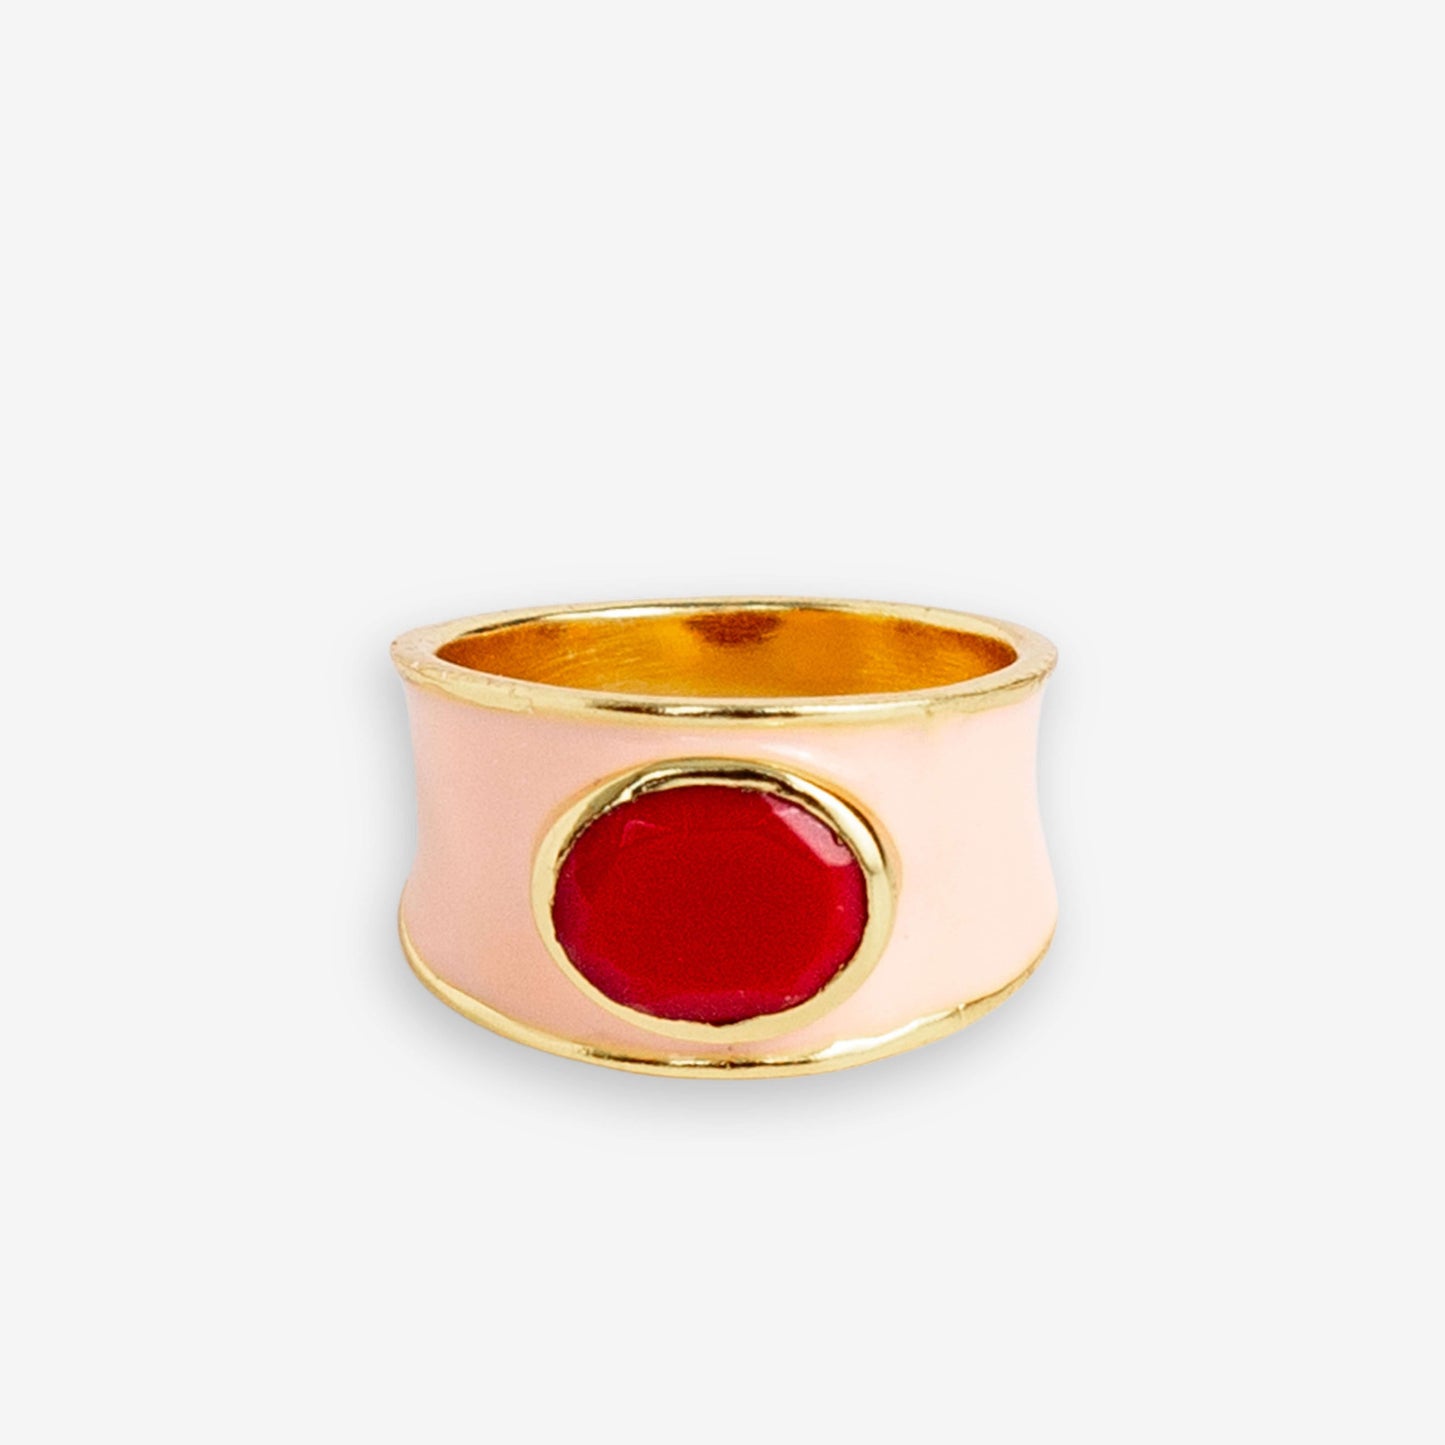 Hazel Oval Stone With Enamel Band Ring Blush/Red Blush/Red- Size 7 RING